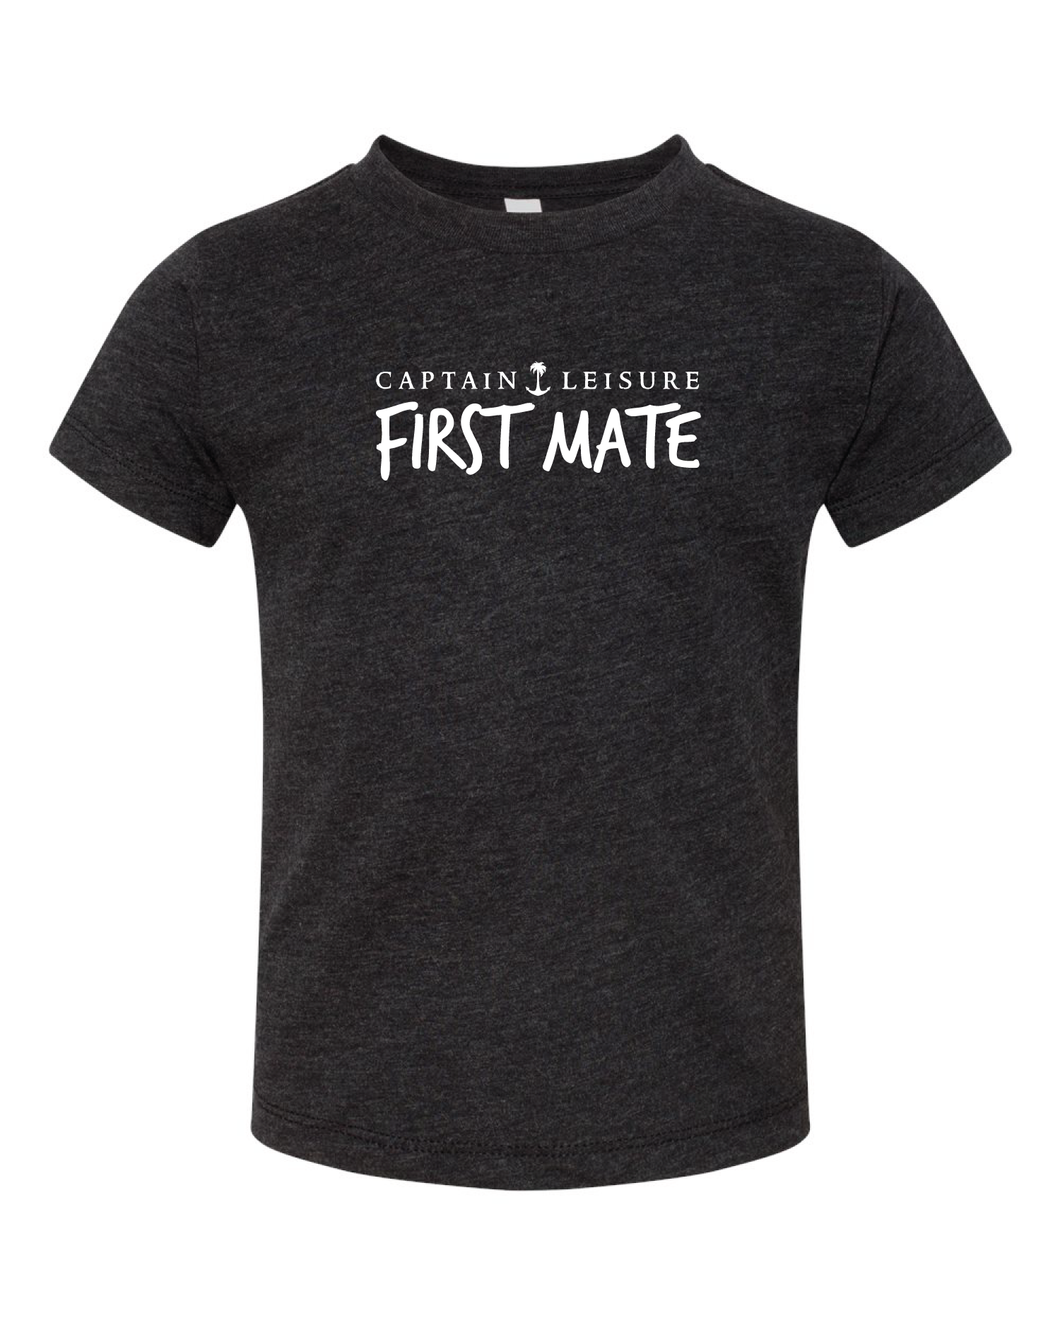 SALE: Toddler First Mate Tshirt